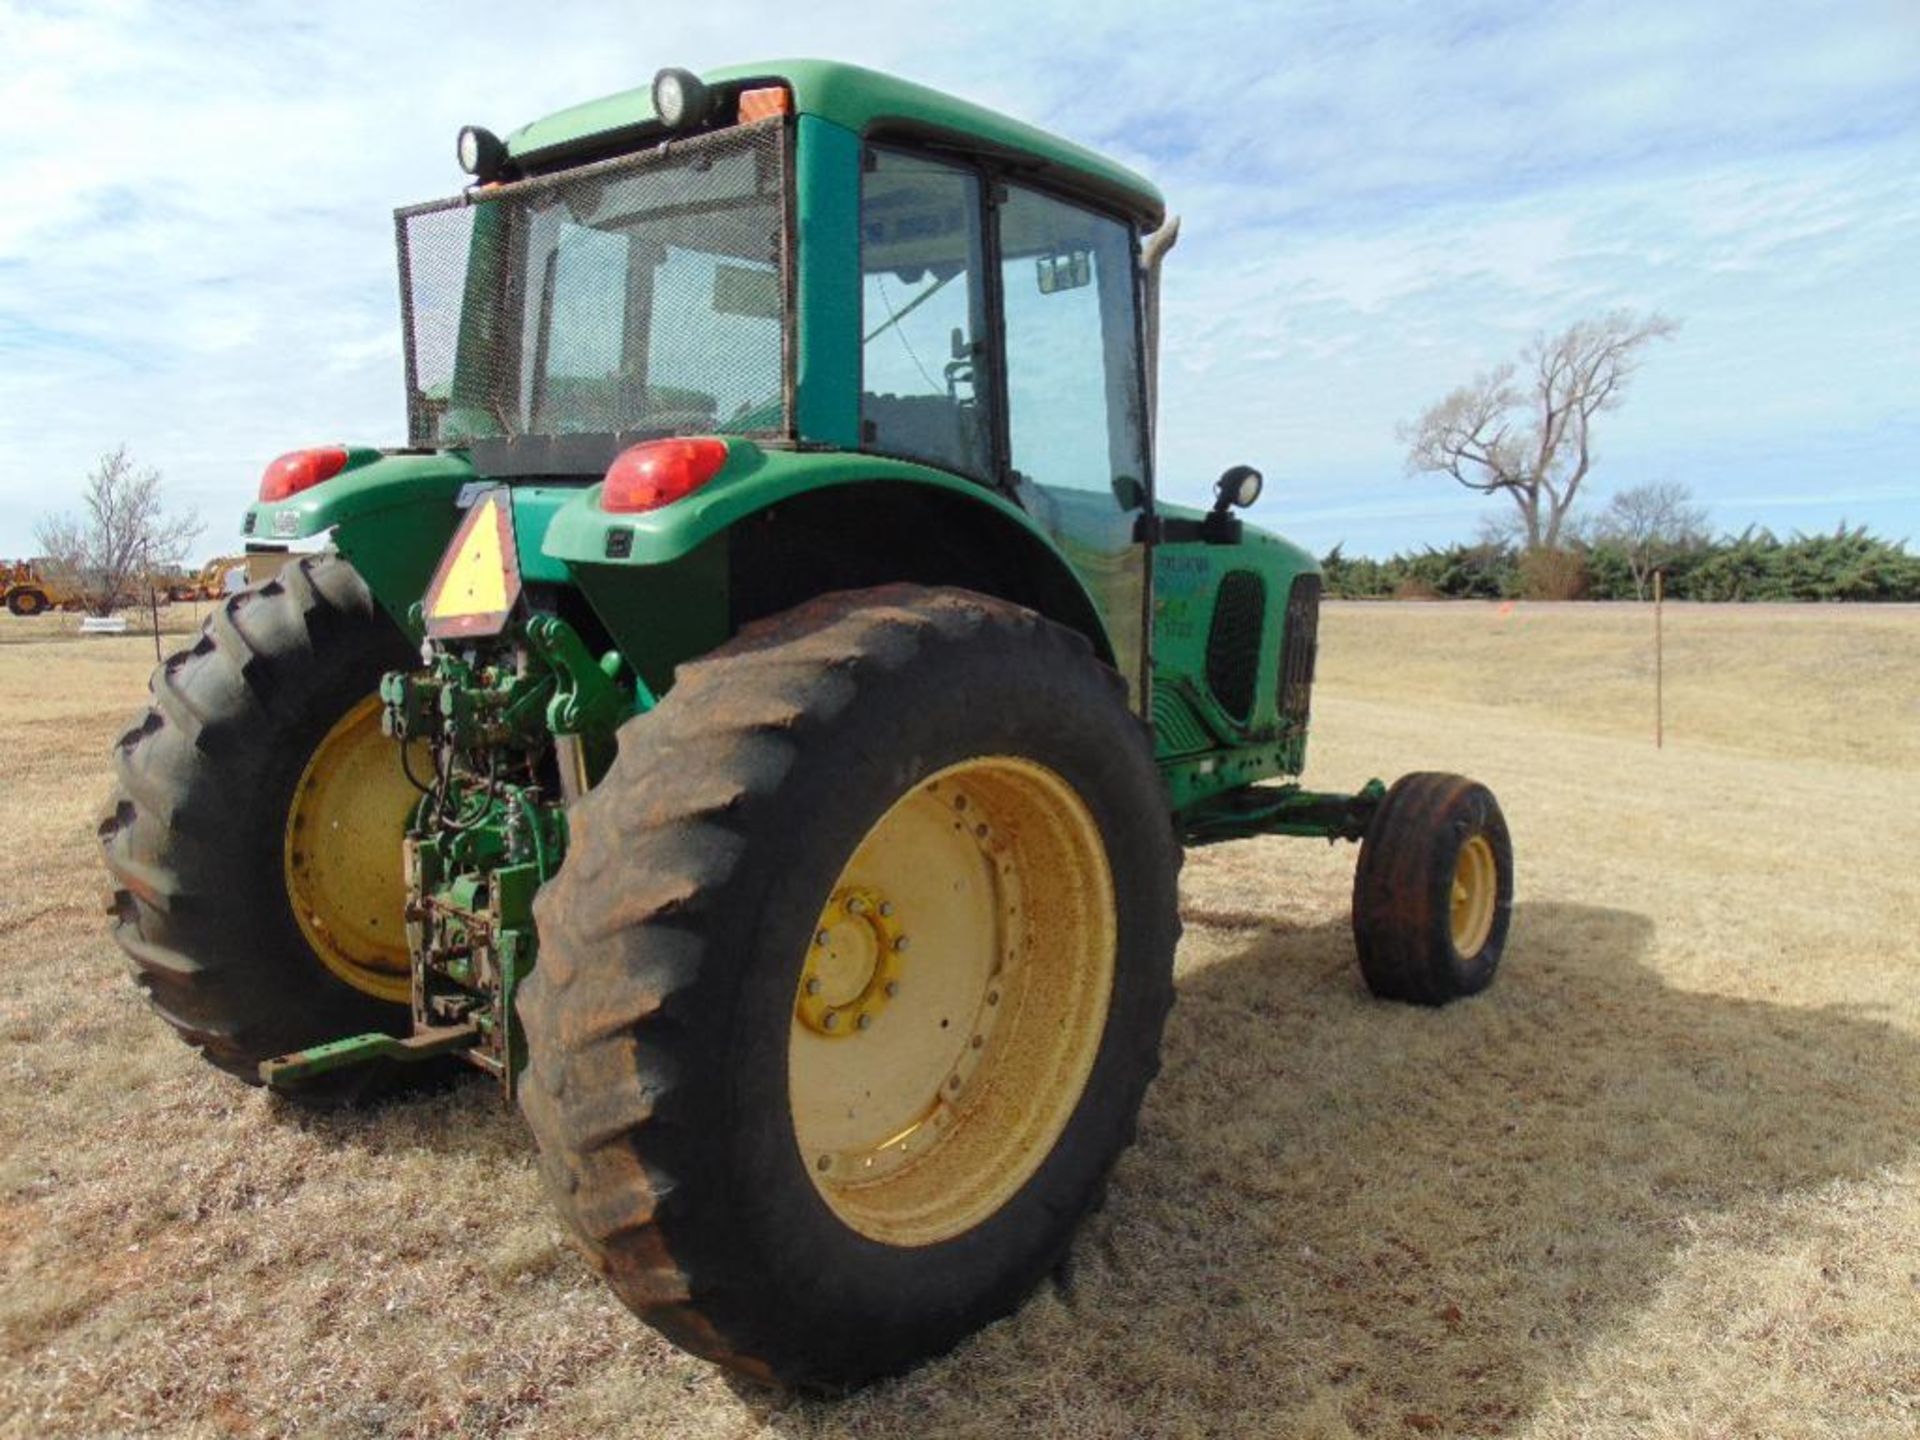 2003 John Deere 7220 Farm Tractor s/n 003071 Cab,a/c, 3pt, pto, hyd outlets - Image 2 of 5